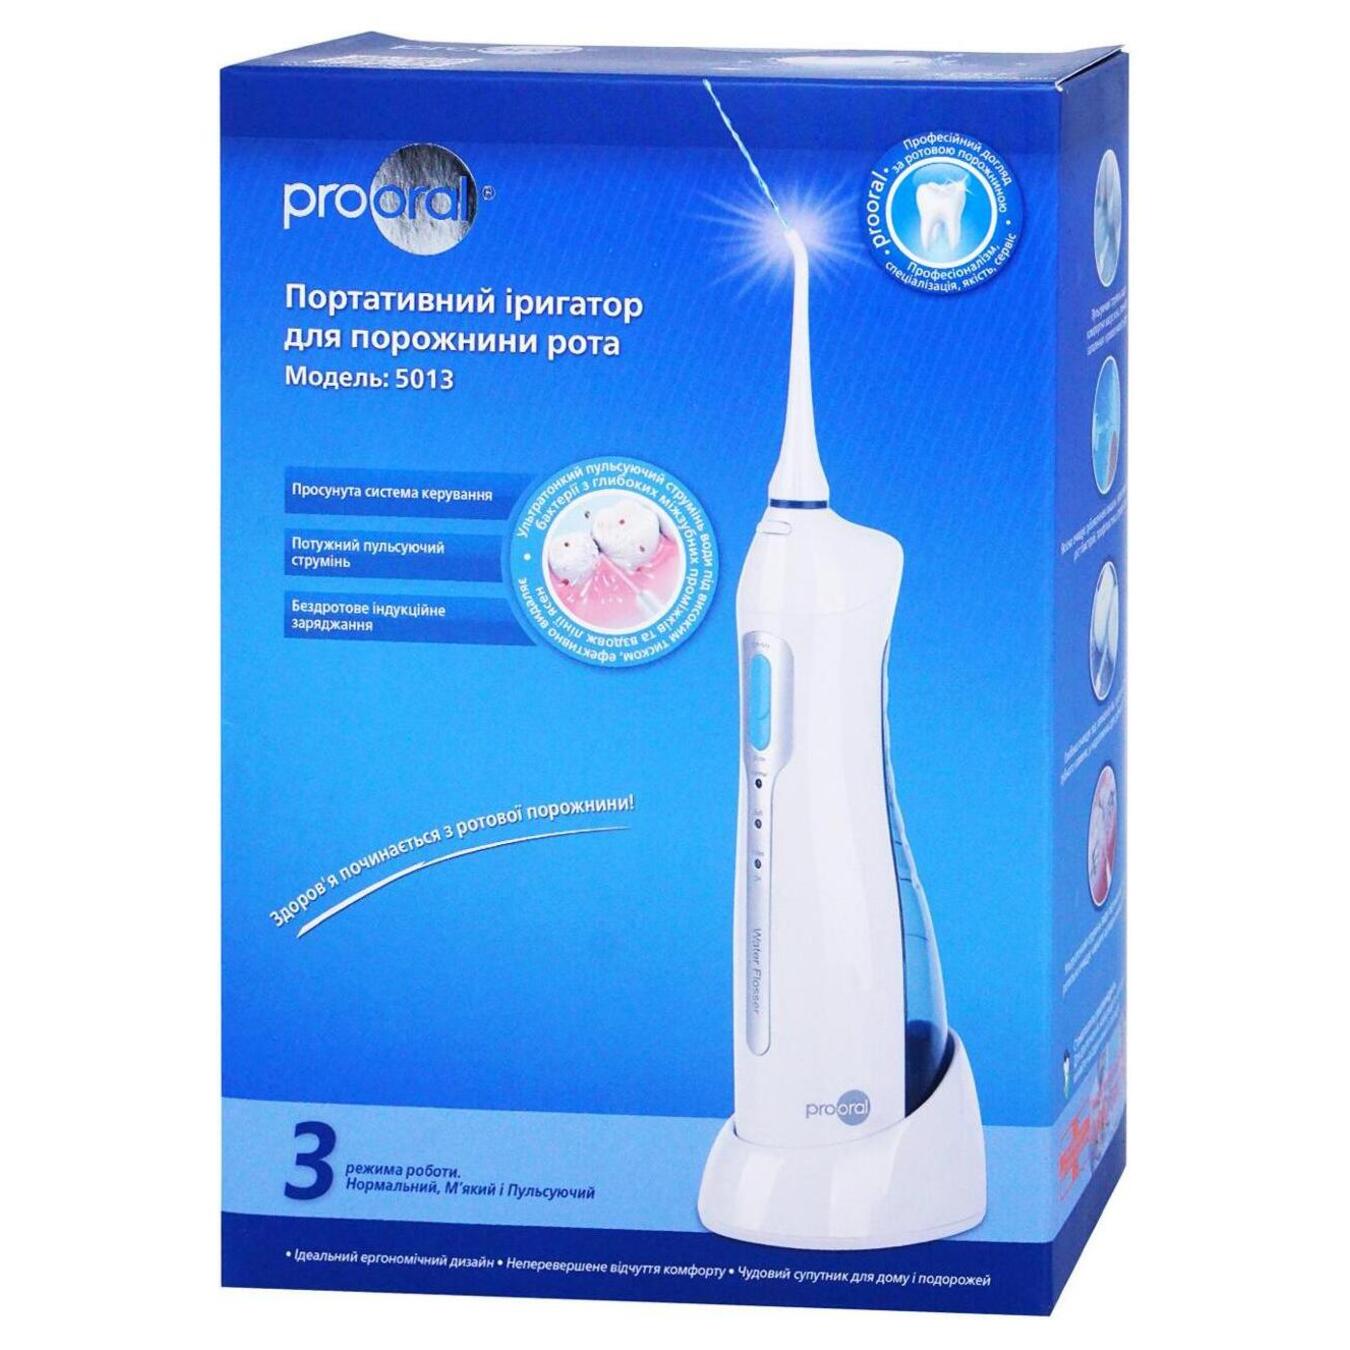 Prooral portable irrigator for oral cavity 5013